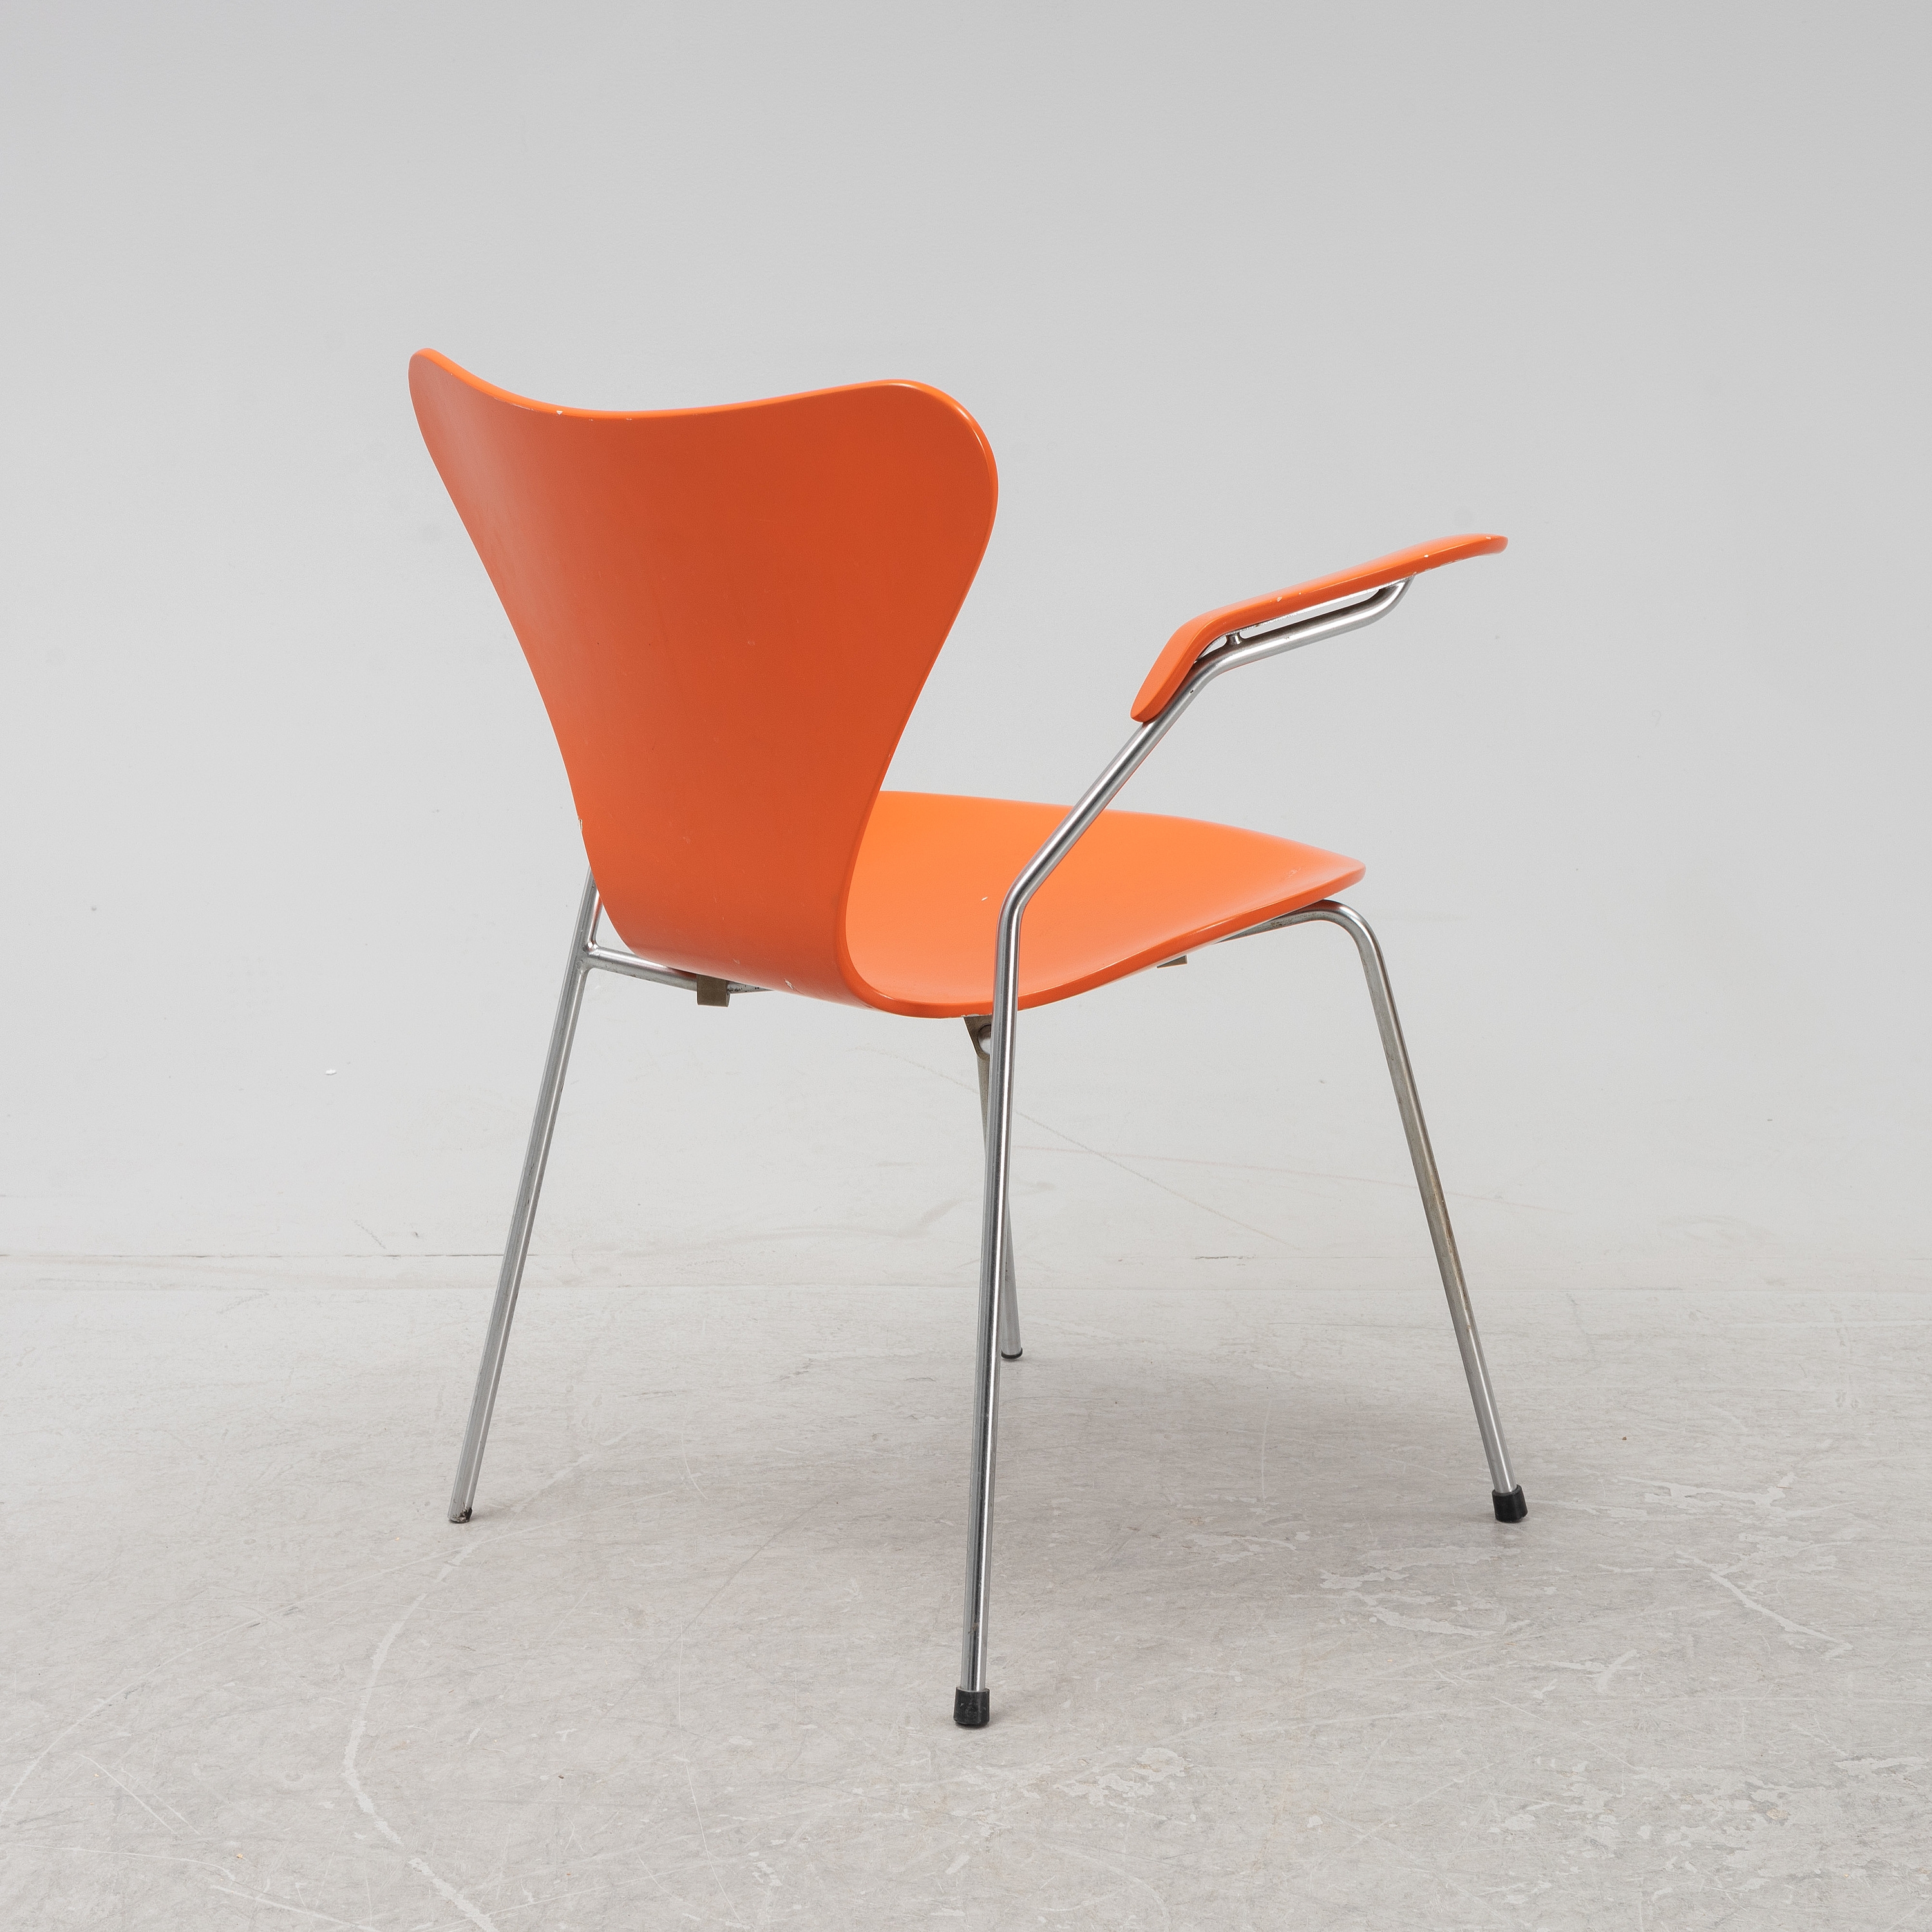 Artwork by Arne Jacobsen, a 'Sjuan' chair, Made of painting